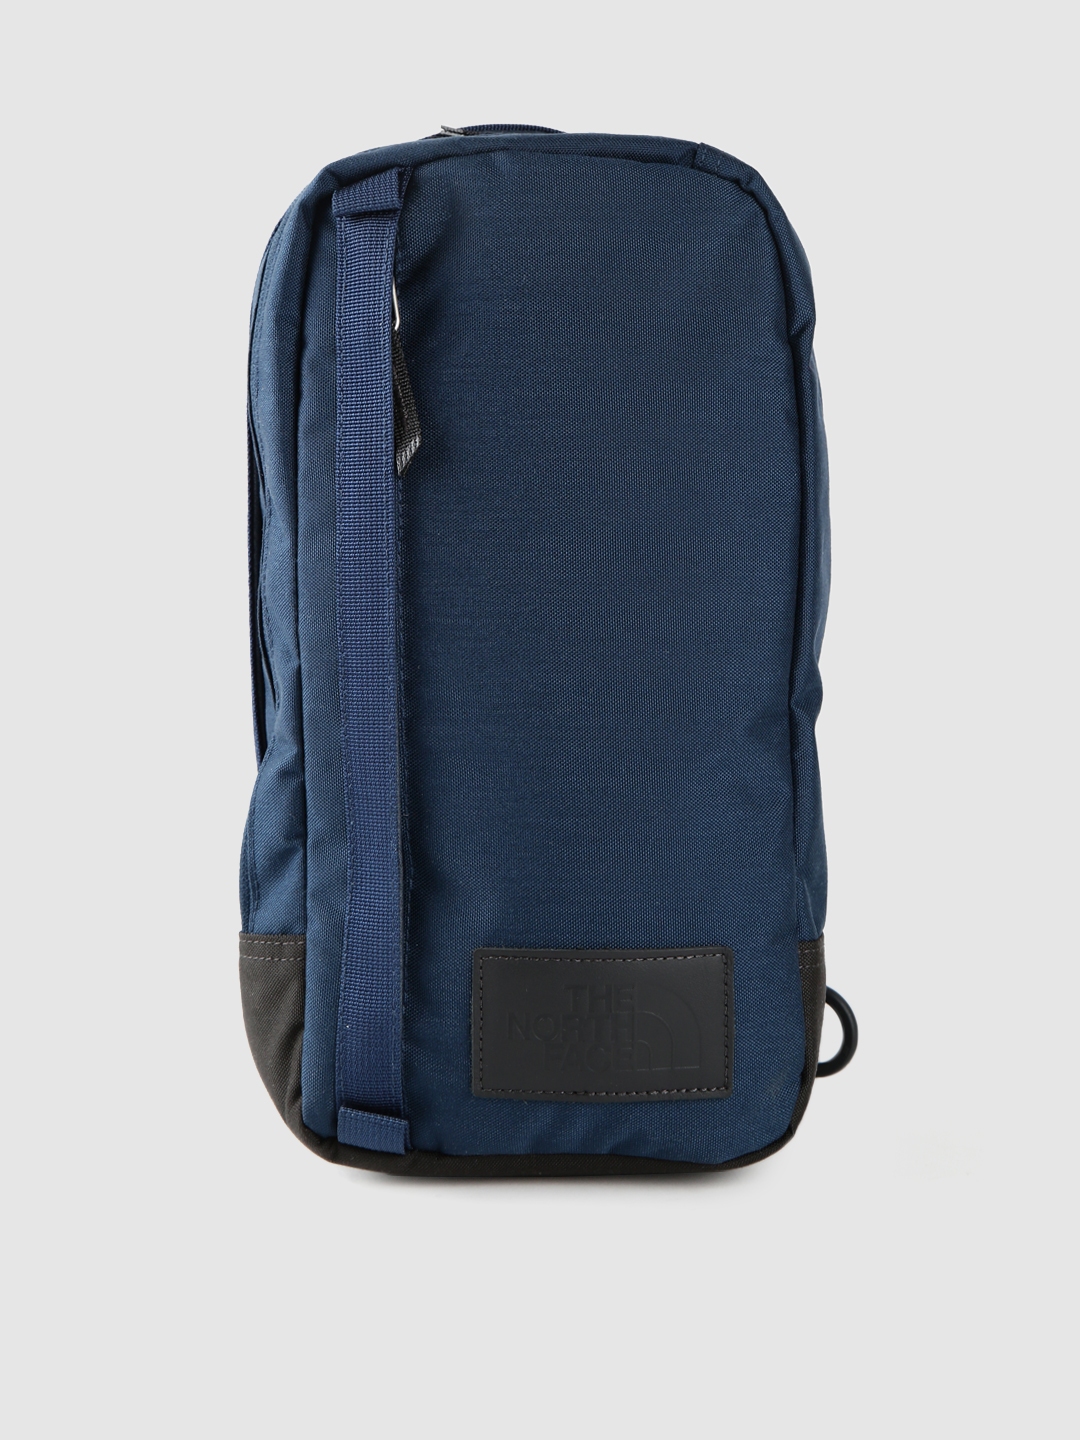 Buy The North Face Unisex Blue Solid Field Backpack - Backpacks for